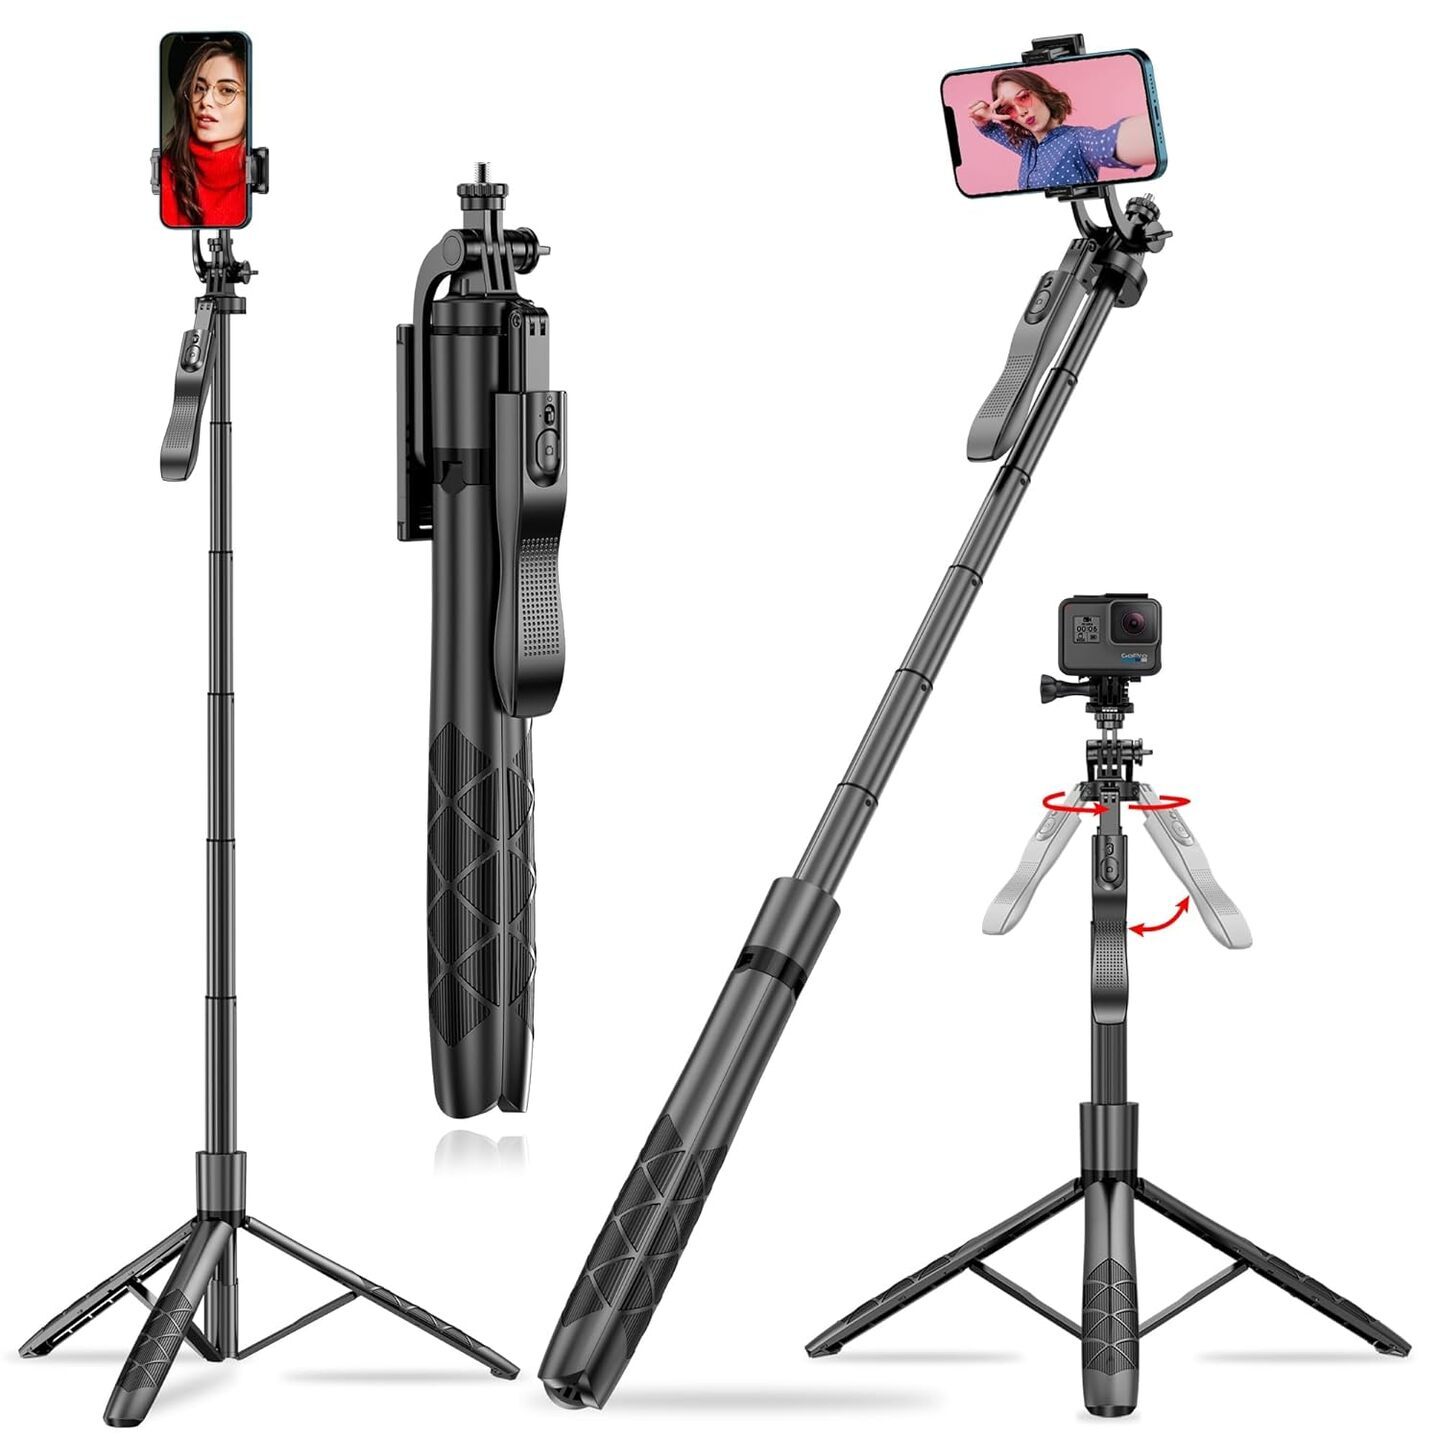 L16 Long Premium Selfie Stick with Tripod Stand and detachable remote